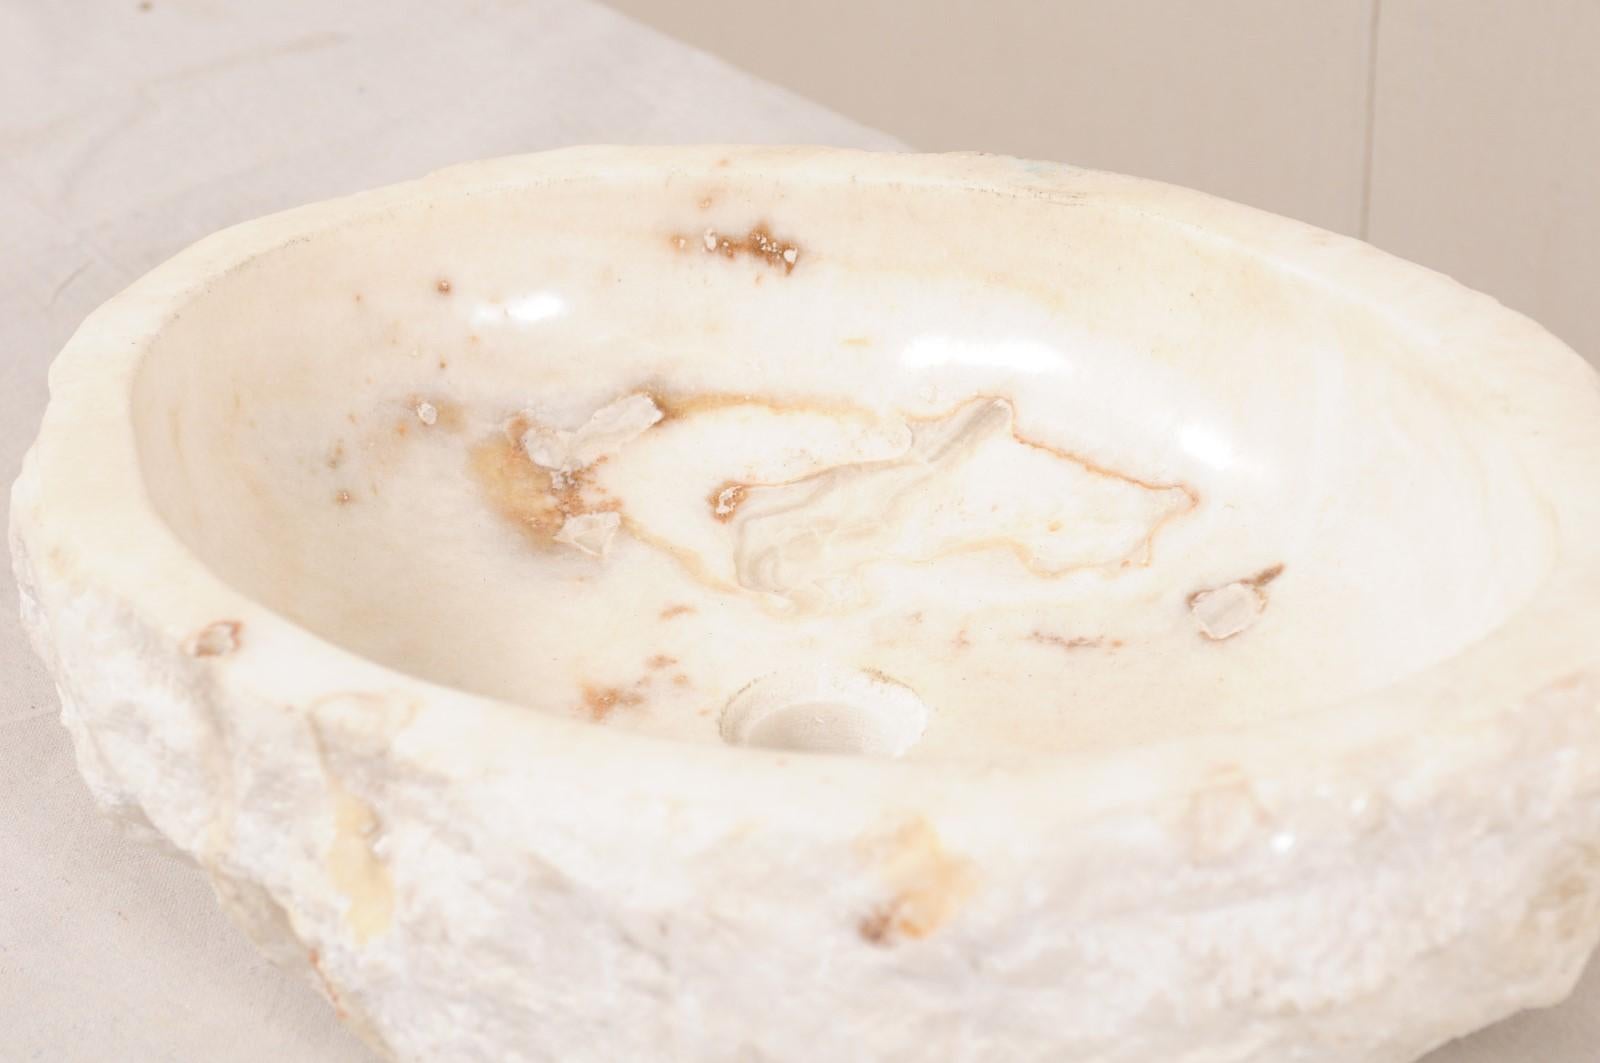 Contemporary Carved and Polished Creamy White Onyx Stone Sink Basin